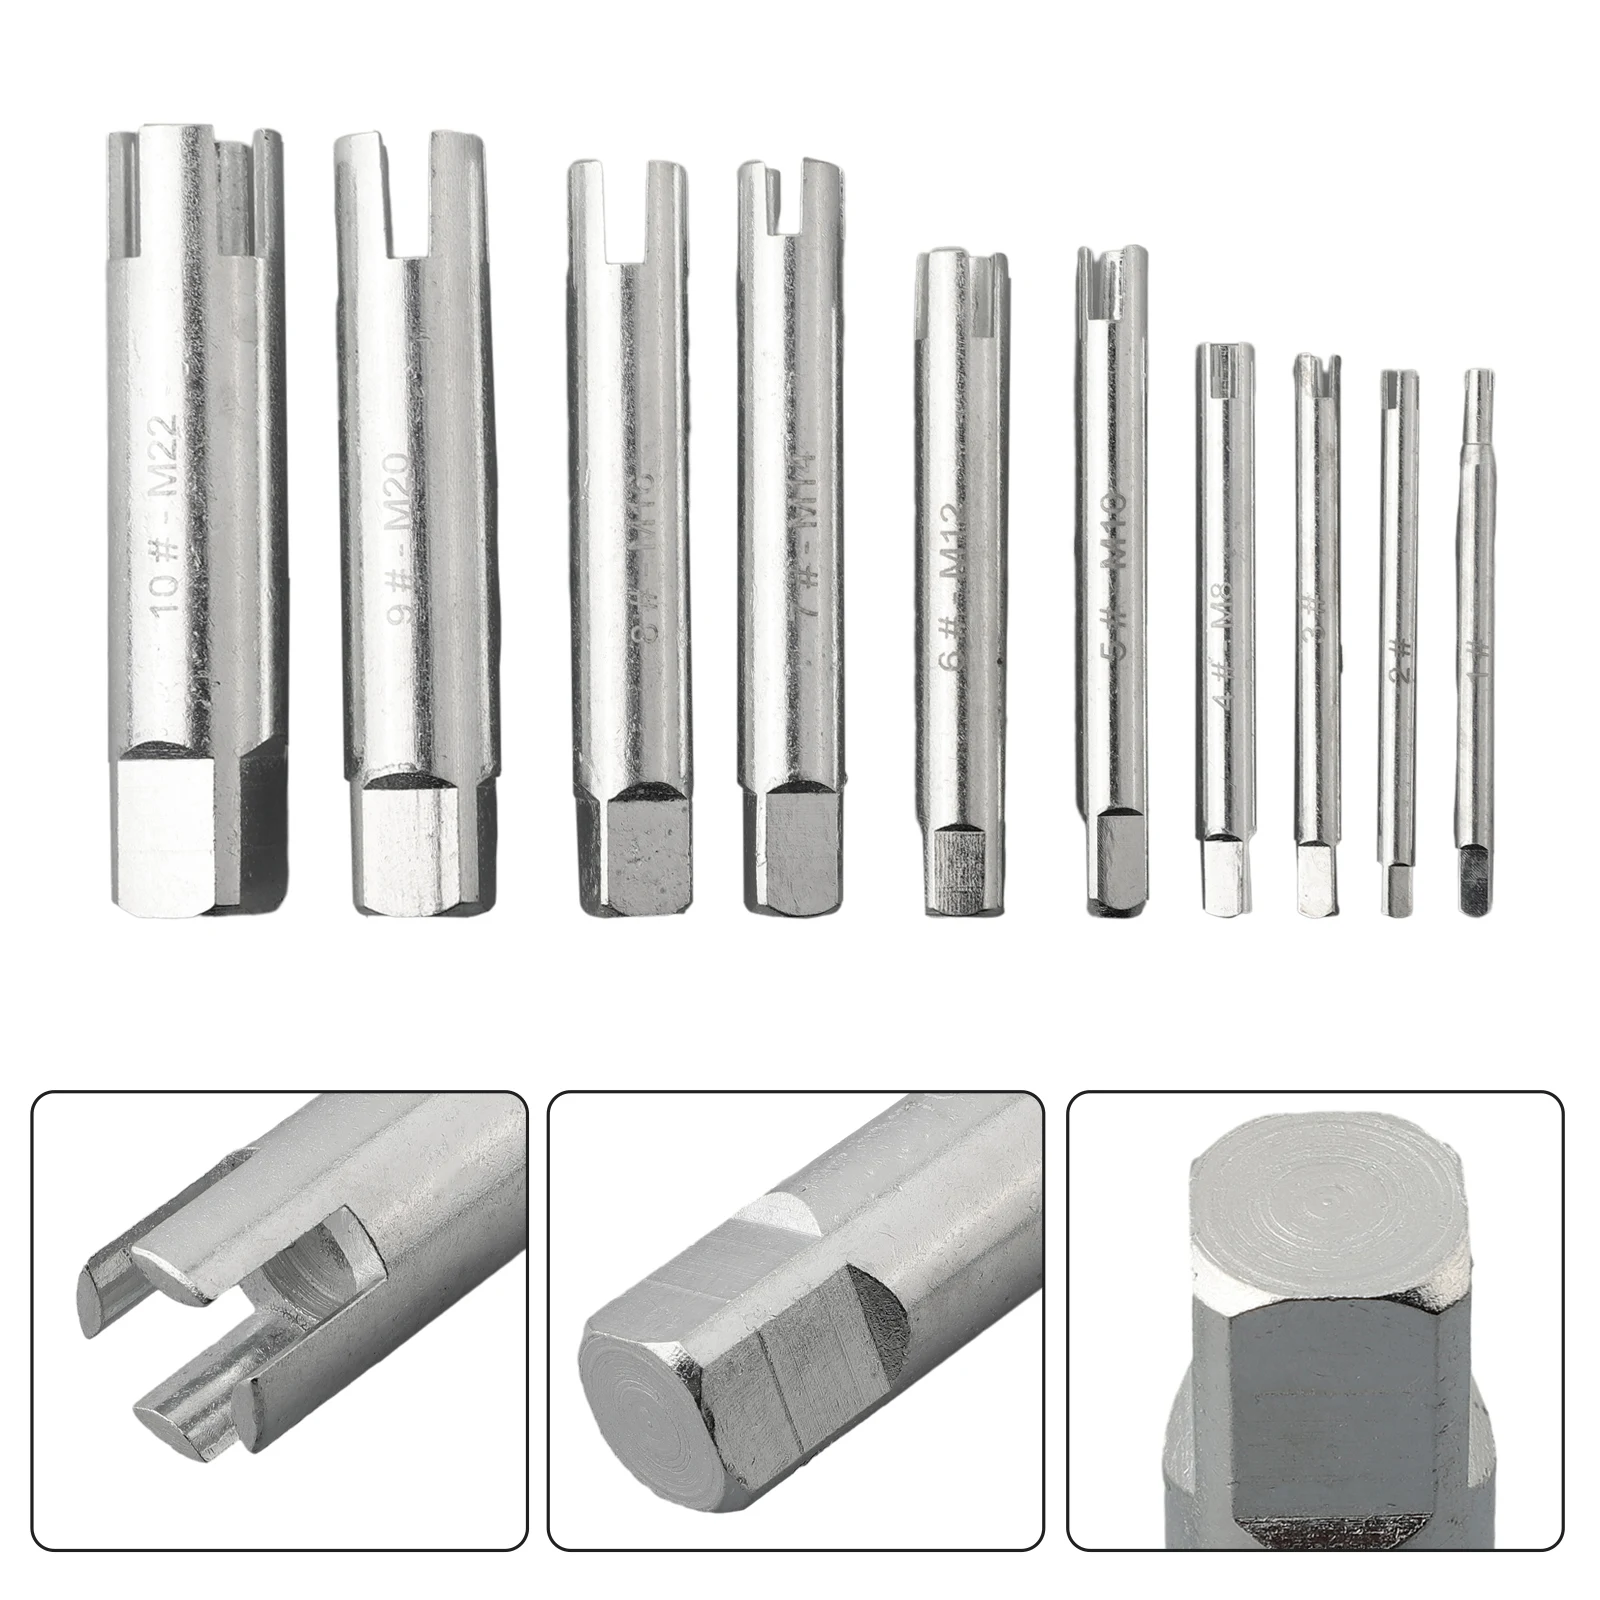 

New High Quality Broken Screw Bolt Remover Screw Extractor Screw Removal Steel Demolition Tools Easily Take Out